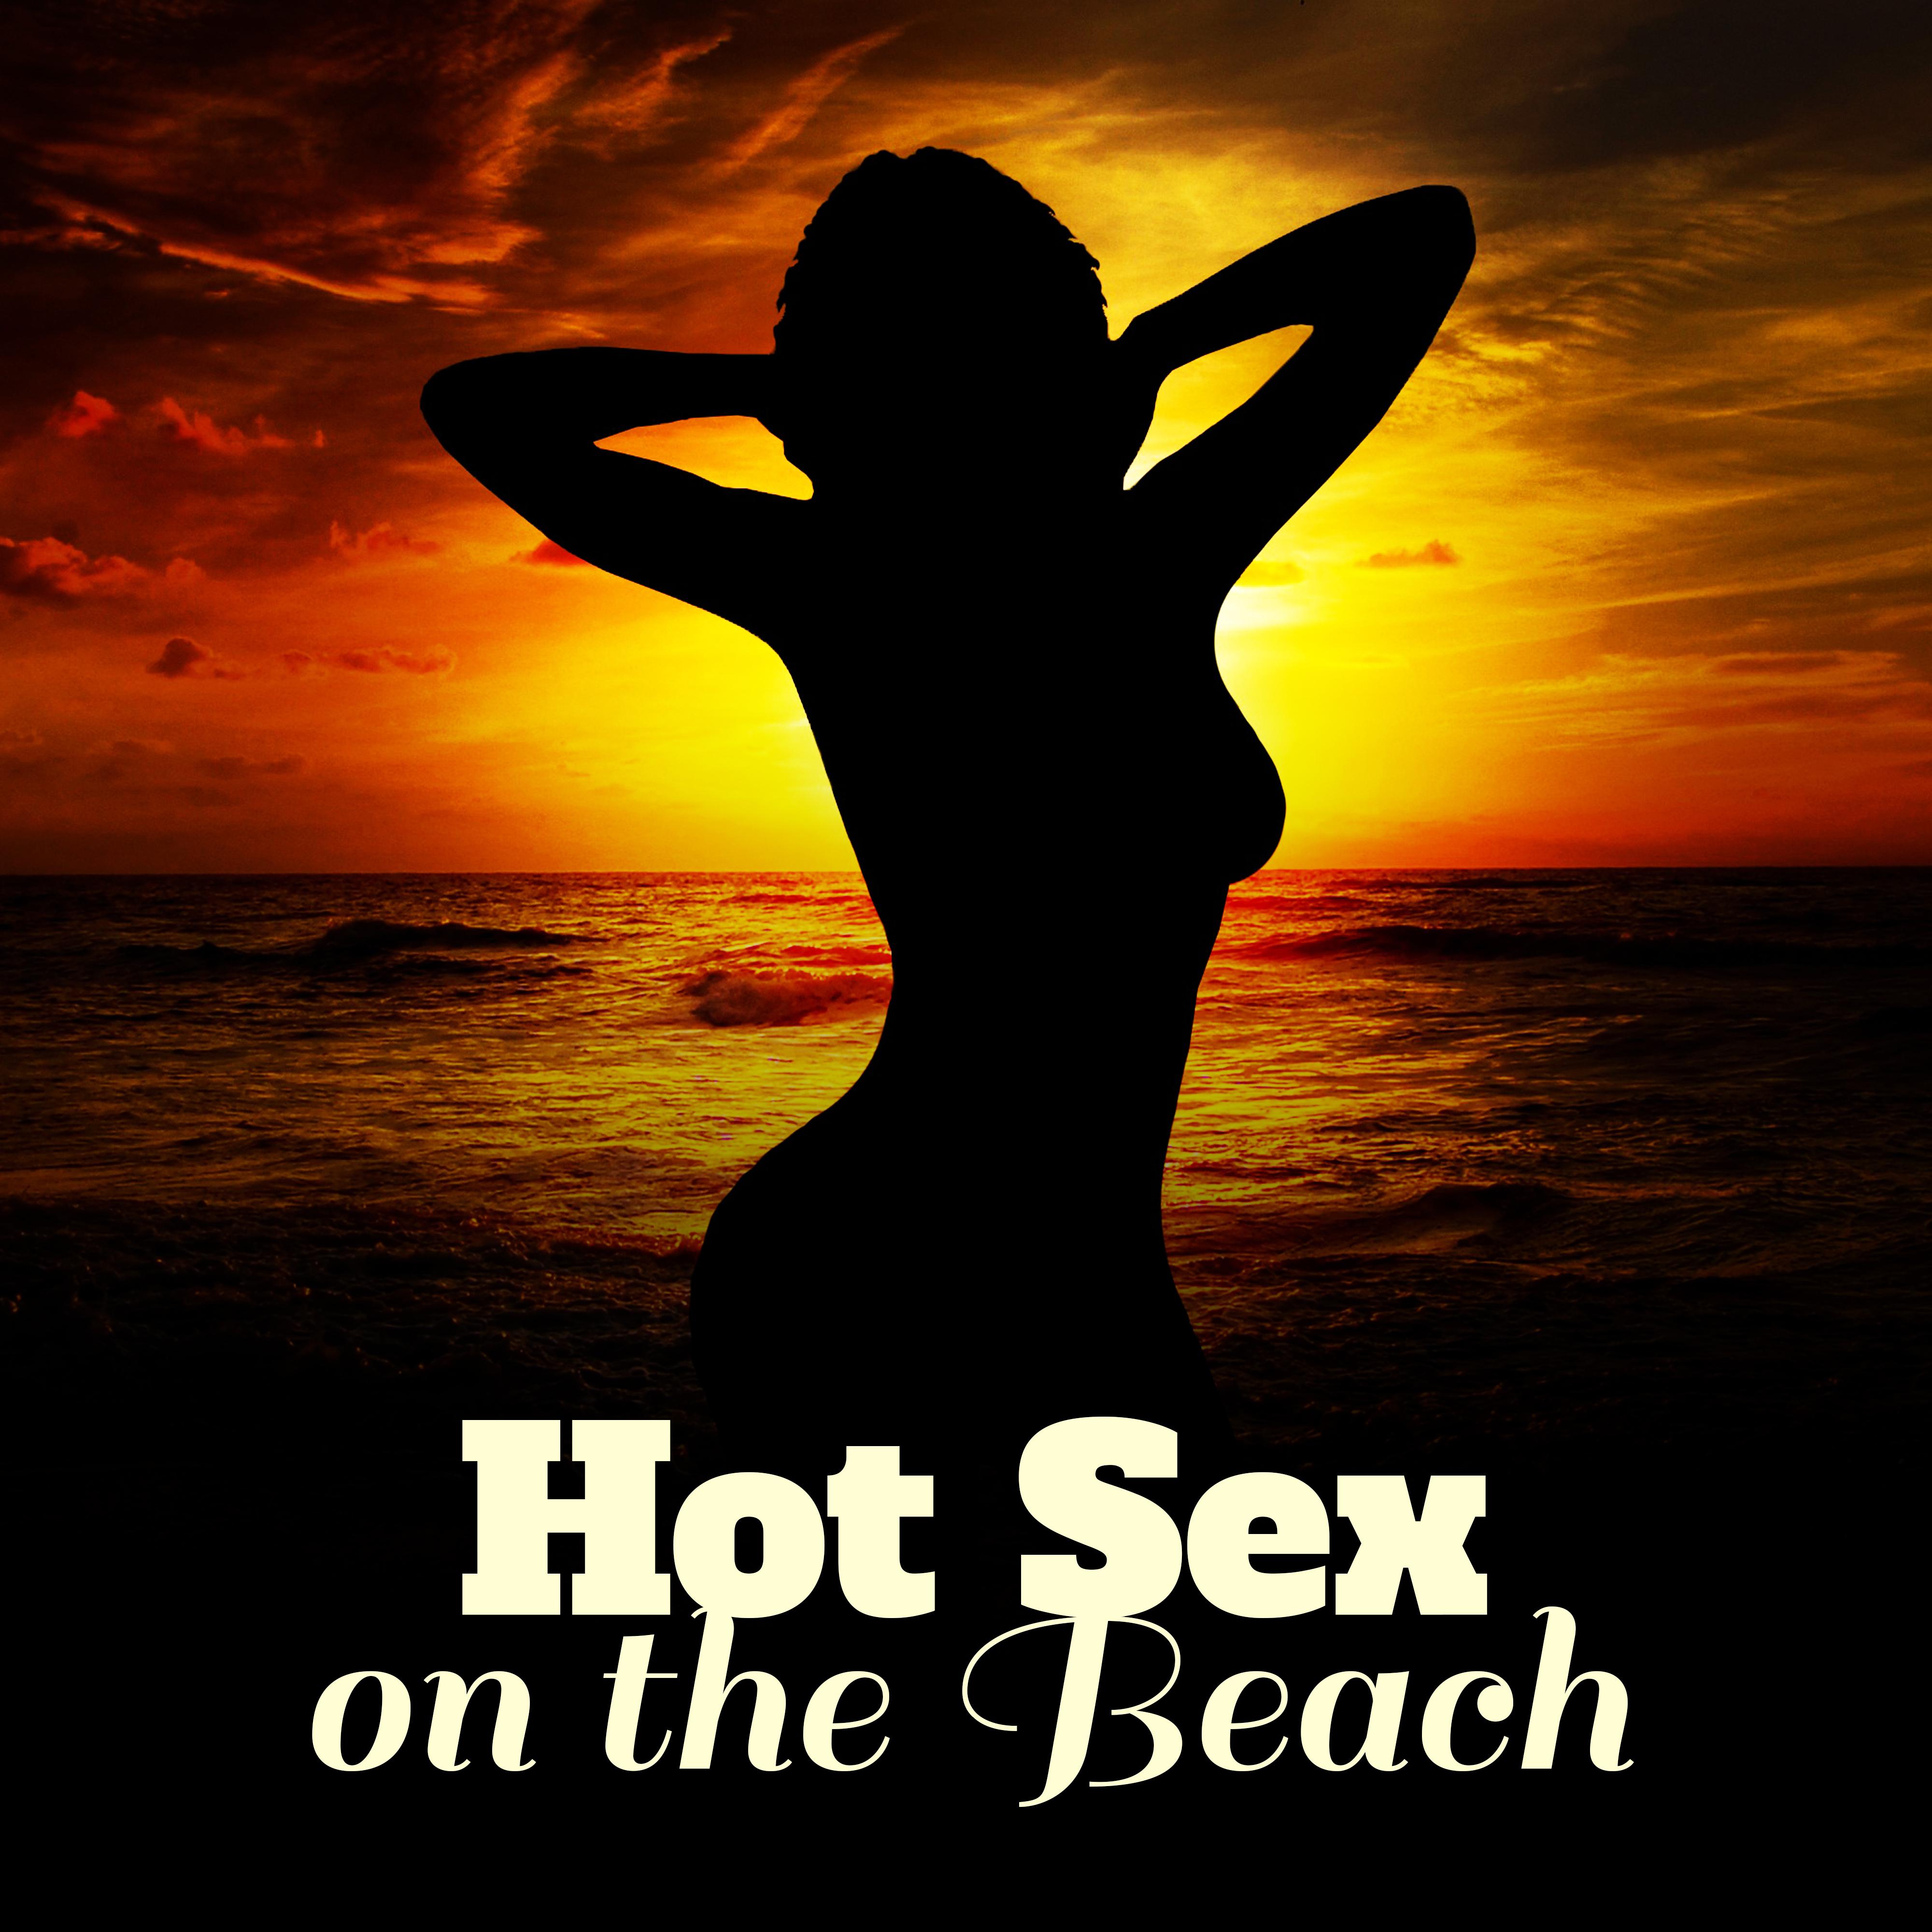 Hot  on the Beach  Summer Love,  Vibes, Sensual Chill, Erotic Time for Two